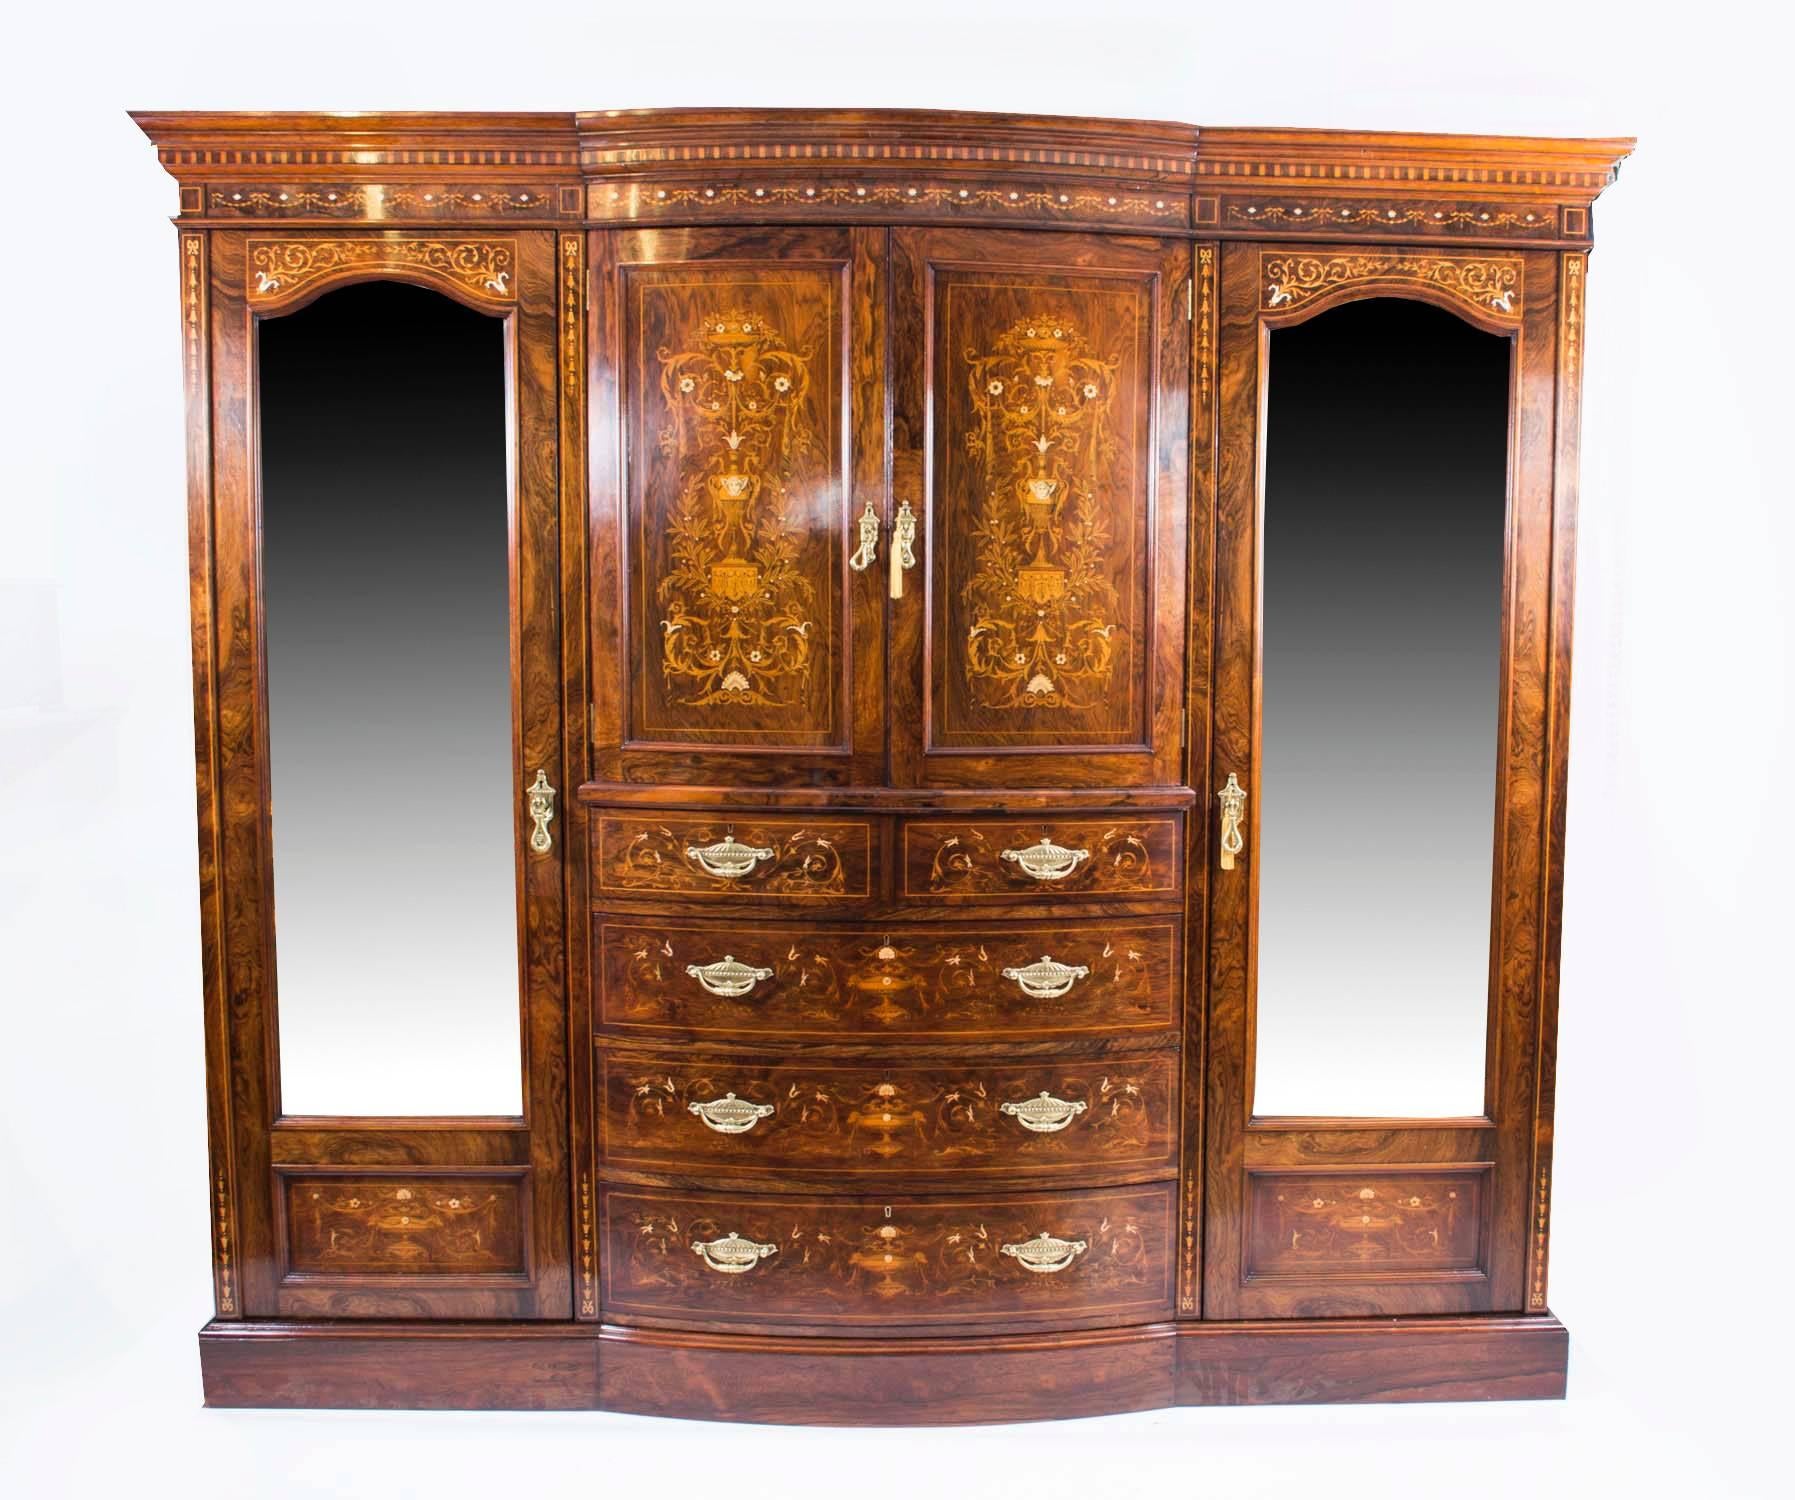 This is a spectacular antique Victorian inlaid rosewood bedroom suite comprising, a wardrobe, dressing table, bedside cabinet and three chairs made by the renowned Victorian retailer and cabinet maker Edwards & Roberts, circa 1880 in date. 

Each